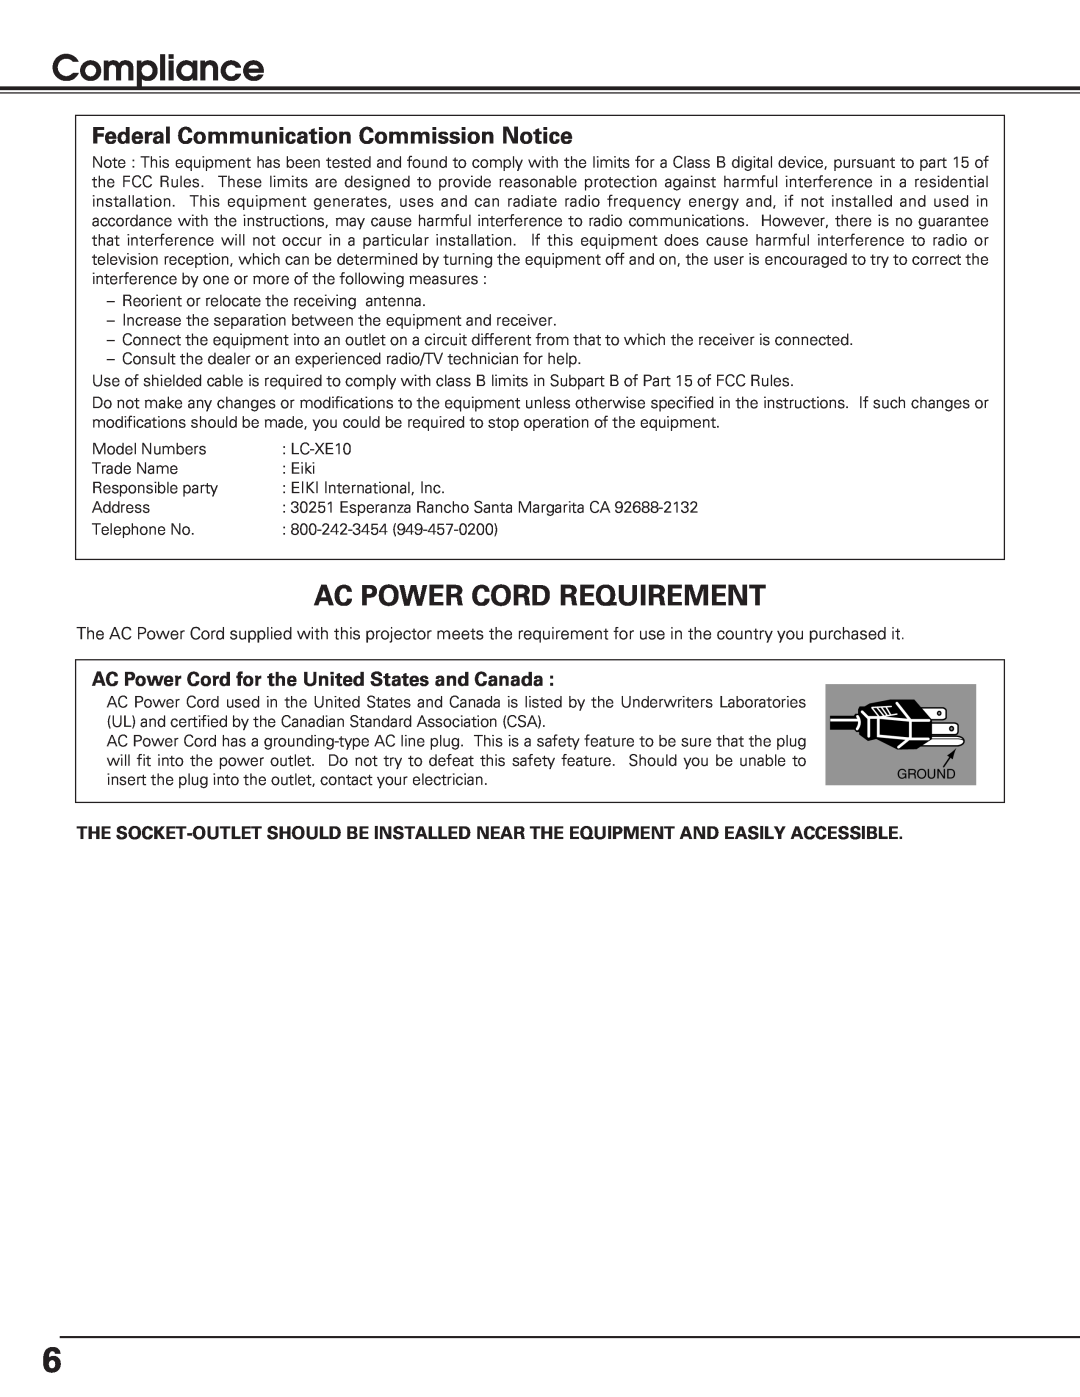 Eiki LC-XE10 instruction manual Compliance, Ac Power Cord Requirement, Federal Communication Commission Notice 